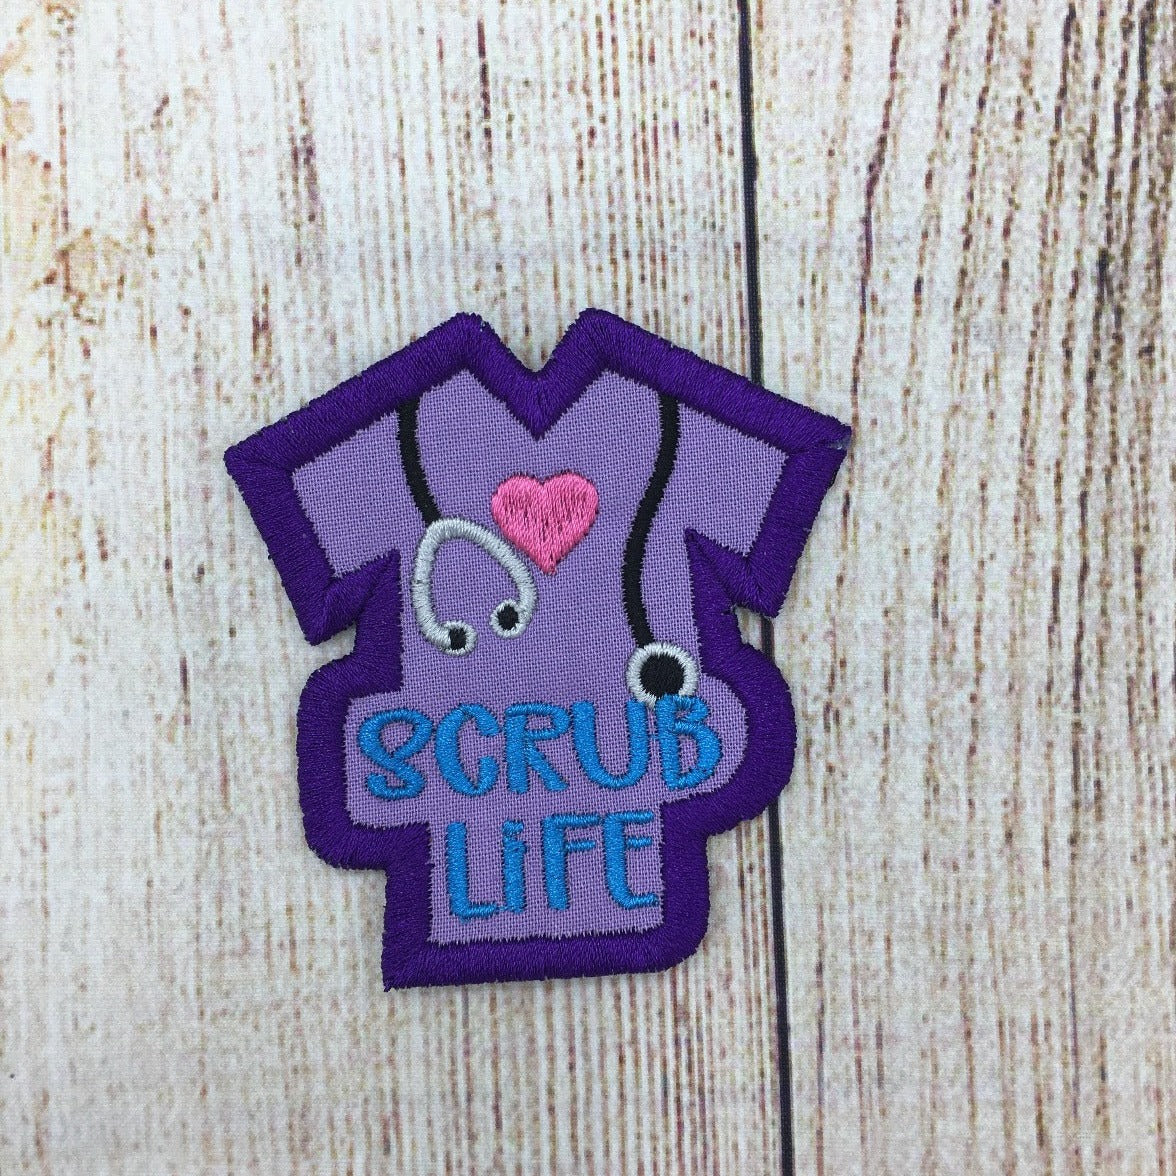 Scrub life embroidered patch for medical staff